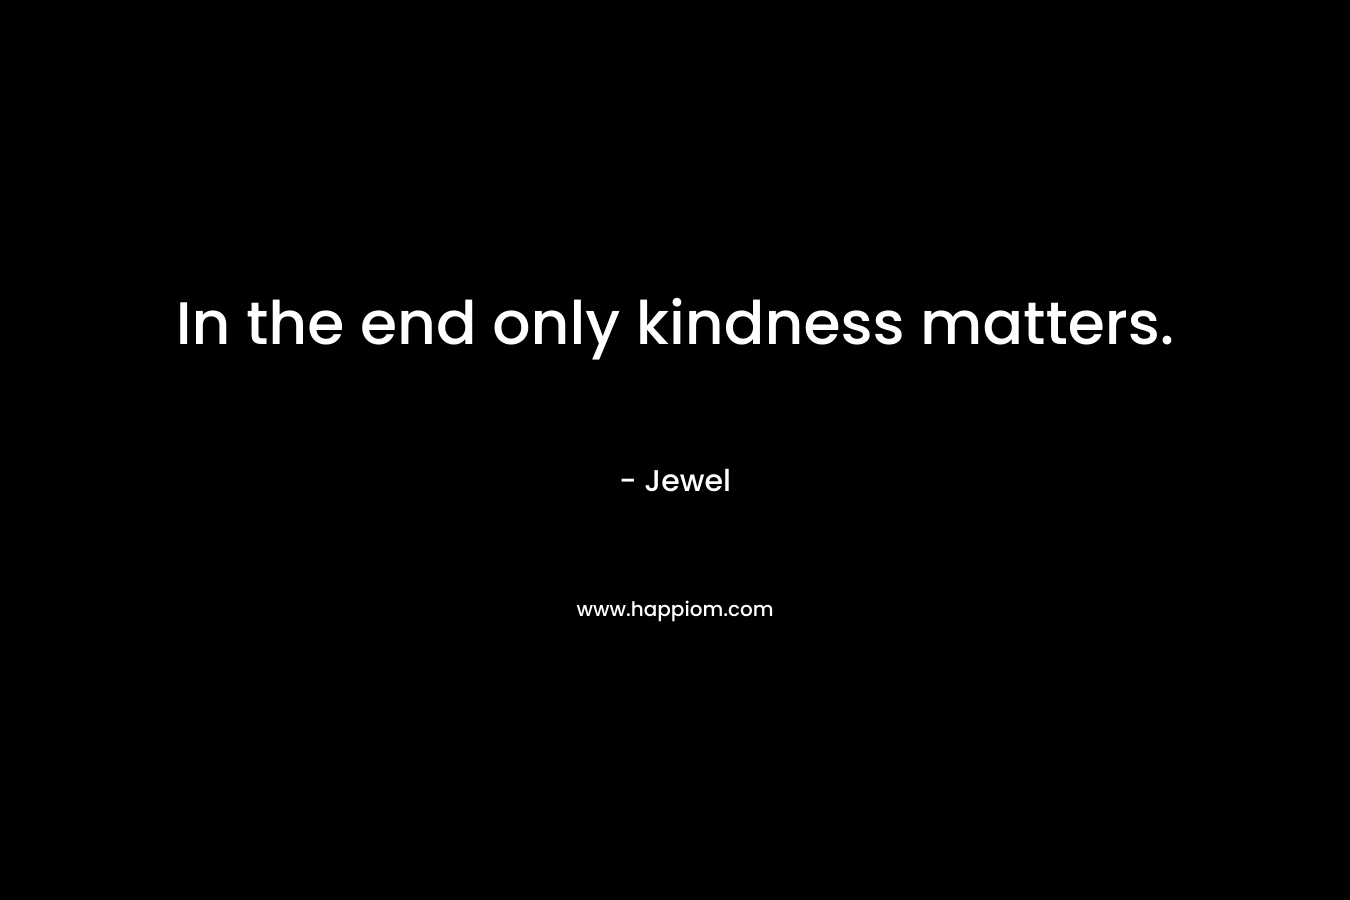 In the end only kindness matters. – Jewel